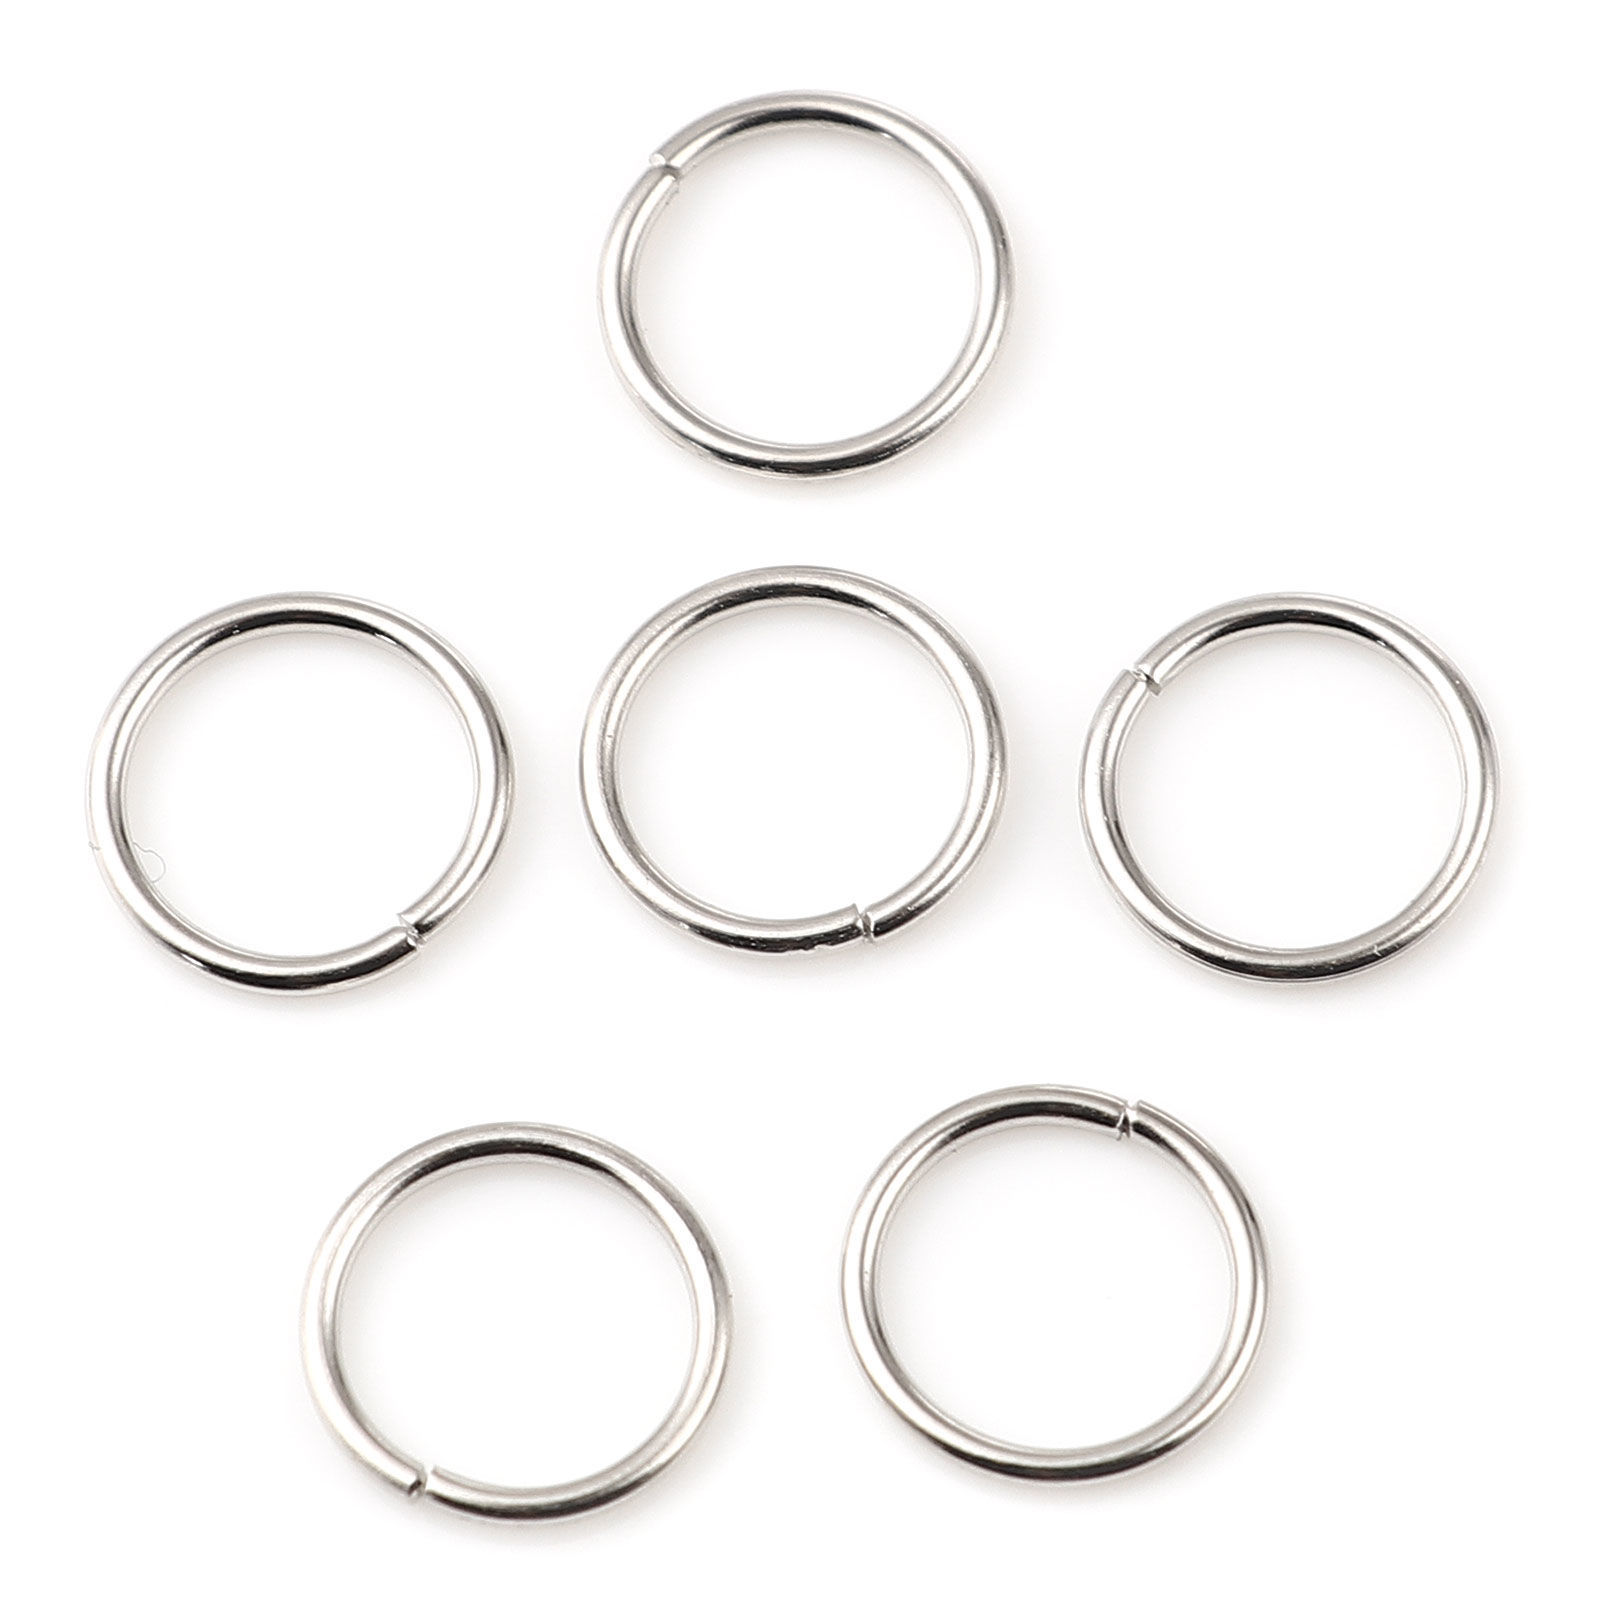 Picture of 0.7mm Iron Based Alloy Open Jump Rings Findings Circle Ring Silver Tone 7mm Dia, 200 PCs